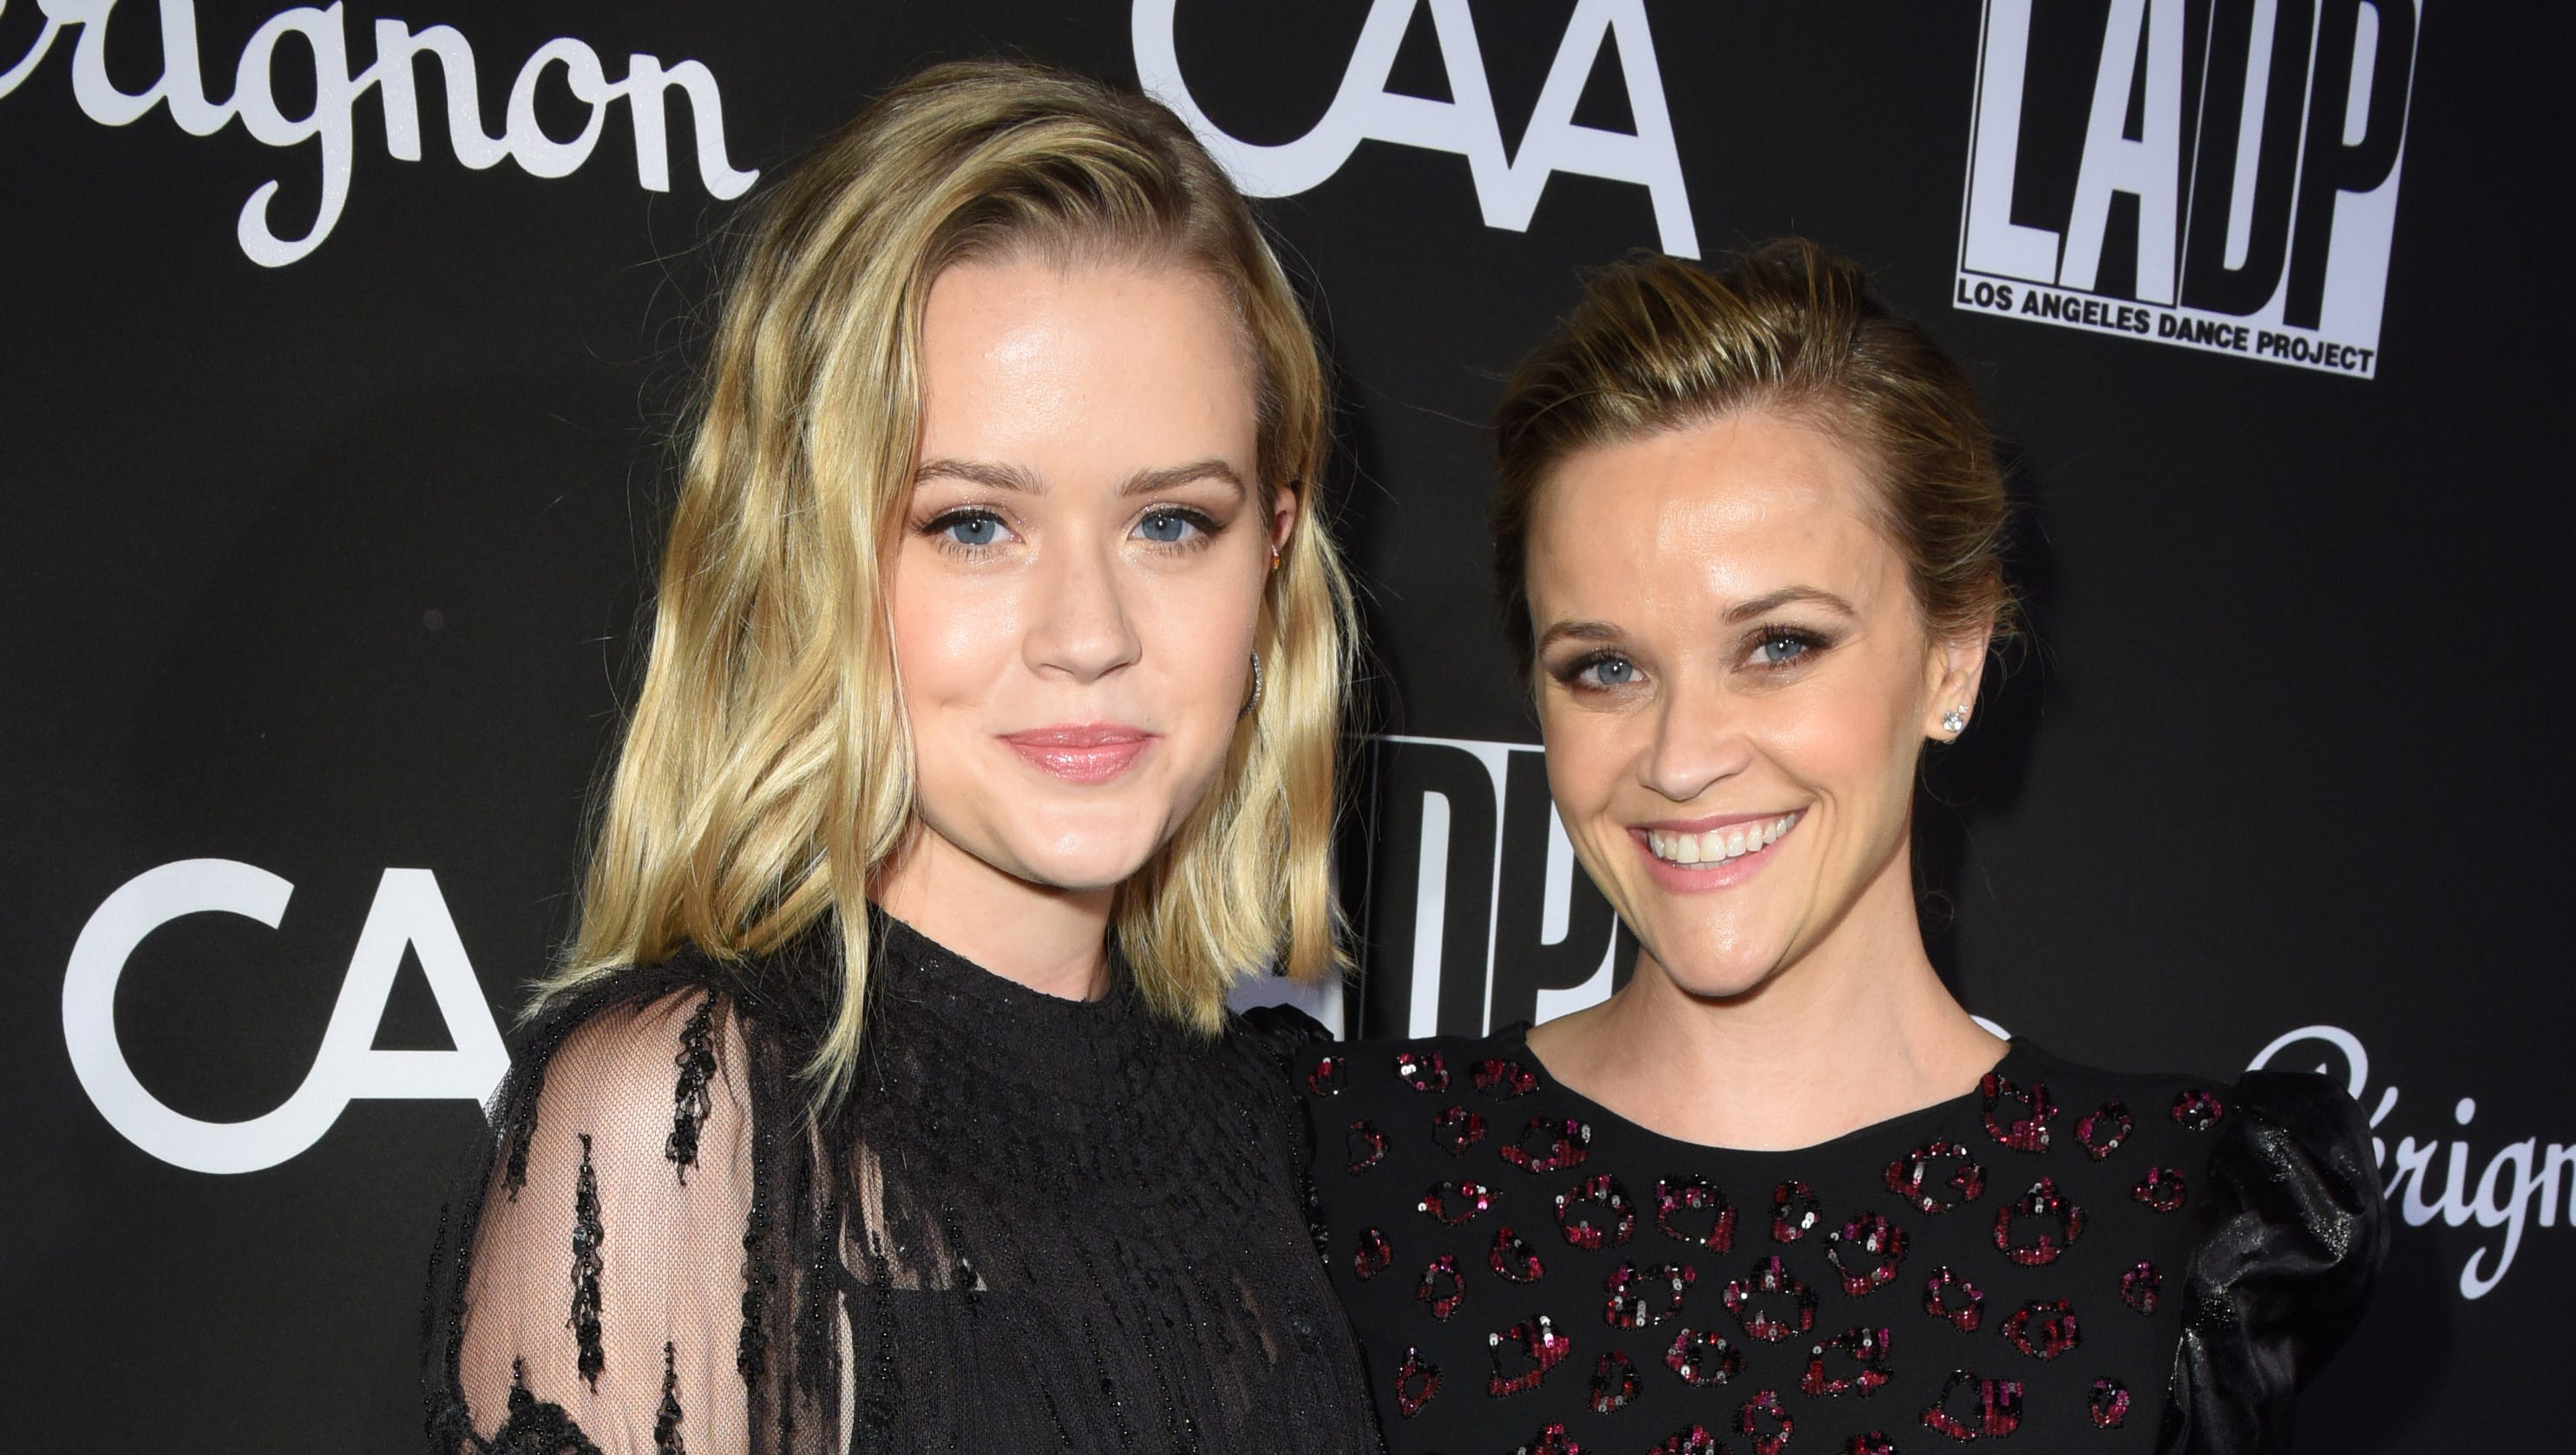 httpsstorylifeparenting20190718reese witherspoon daughter ava phillppe says mom inspires her1765464001